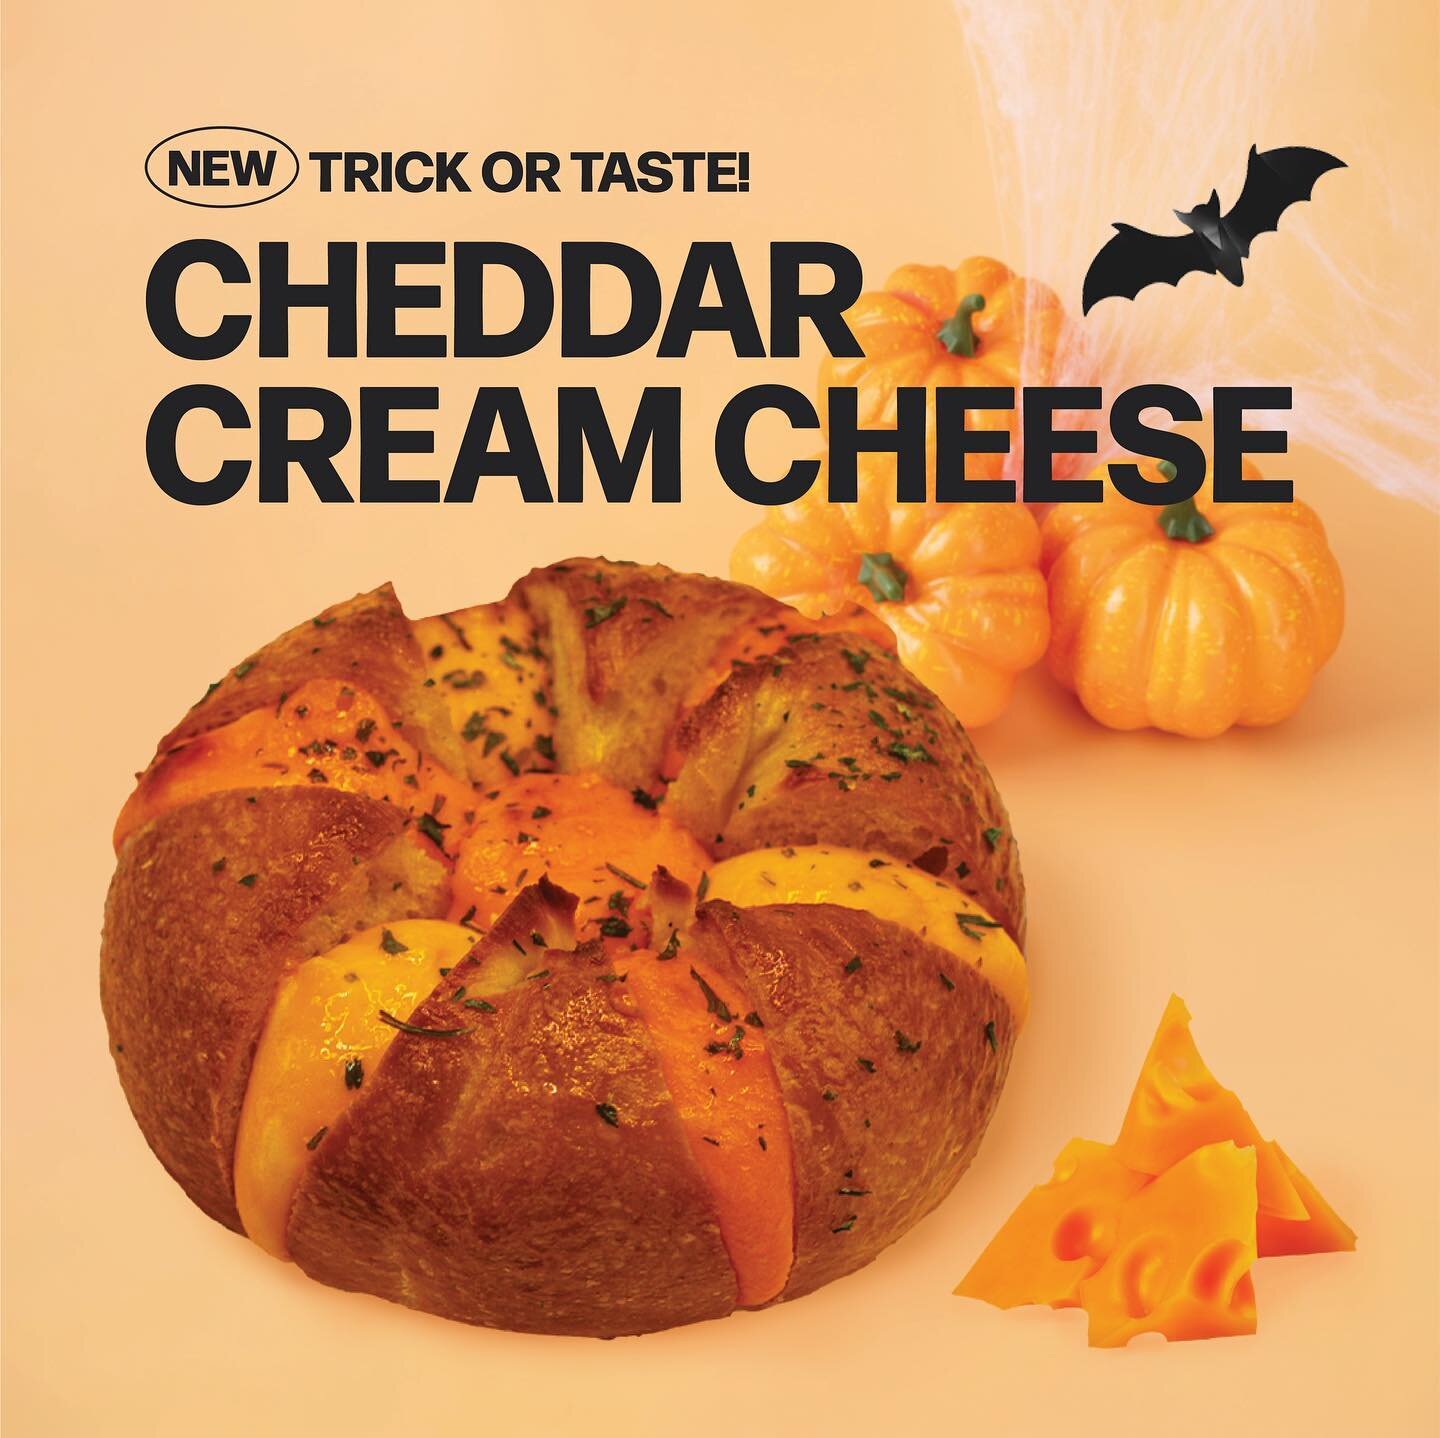 The Perfect #halloween🎃 Giveaway 
___
🚀 Launching new limited batch sweet and creamy #Cheddar cream cheese #bagel 🧀 Win a 6 pack (half-dozen) box for your work, friends &amp; family perfect tasty gift for this #halloween 👻 
___
👮&zwj;♀️ Giveaway